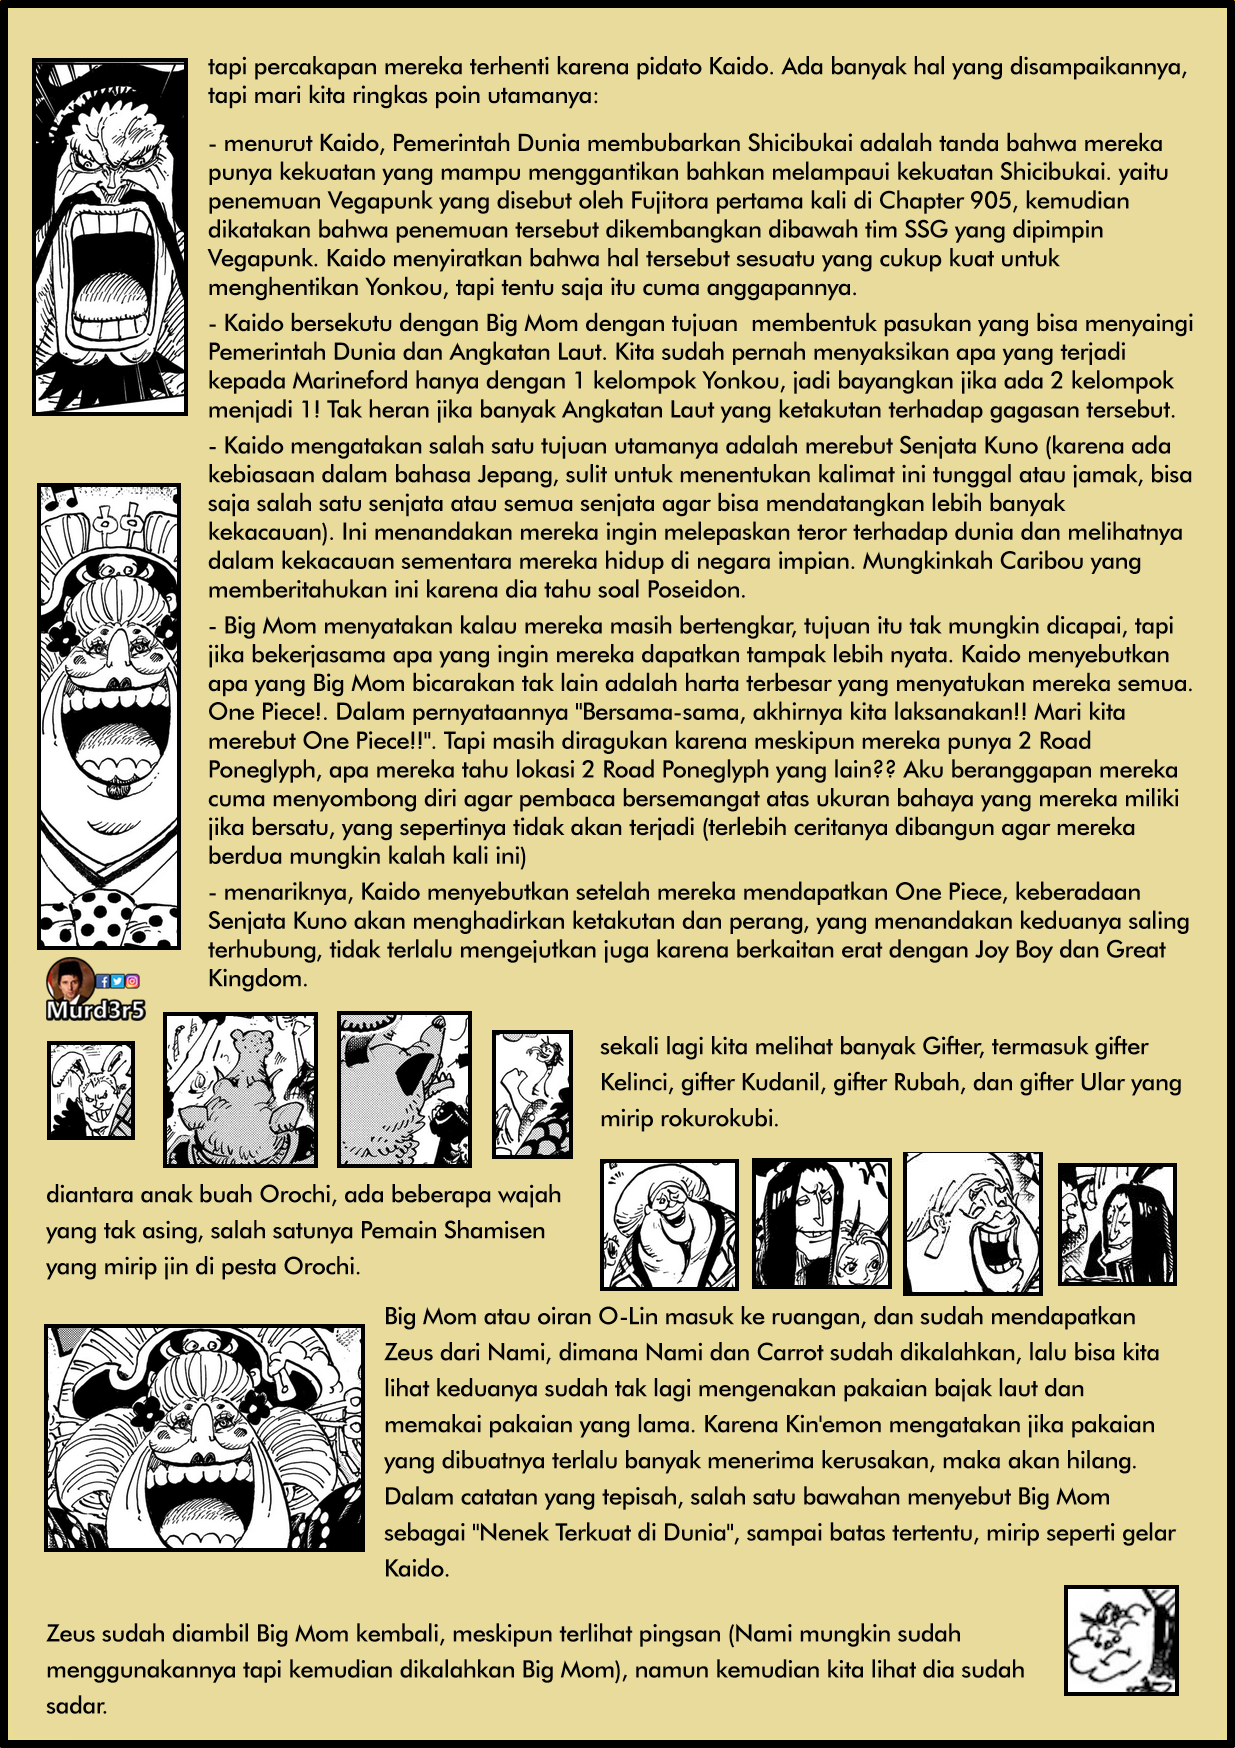 one-piece-chapter-985-in-depth-analysis-4